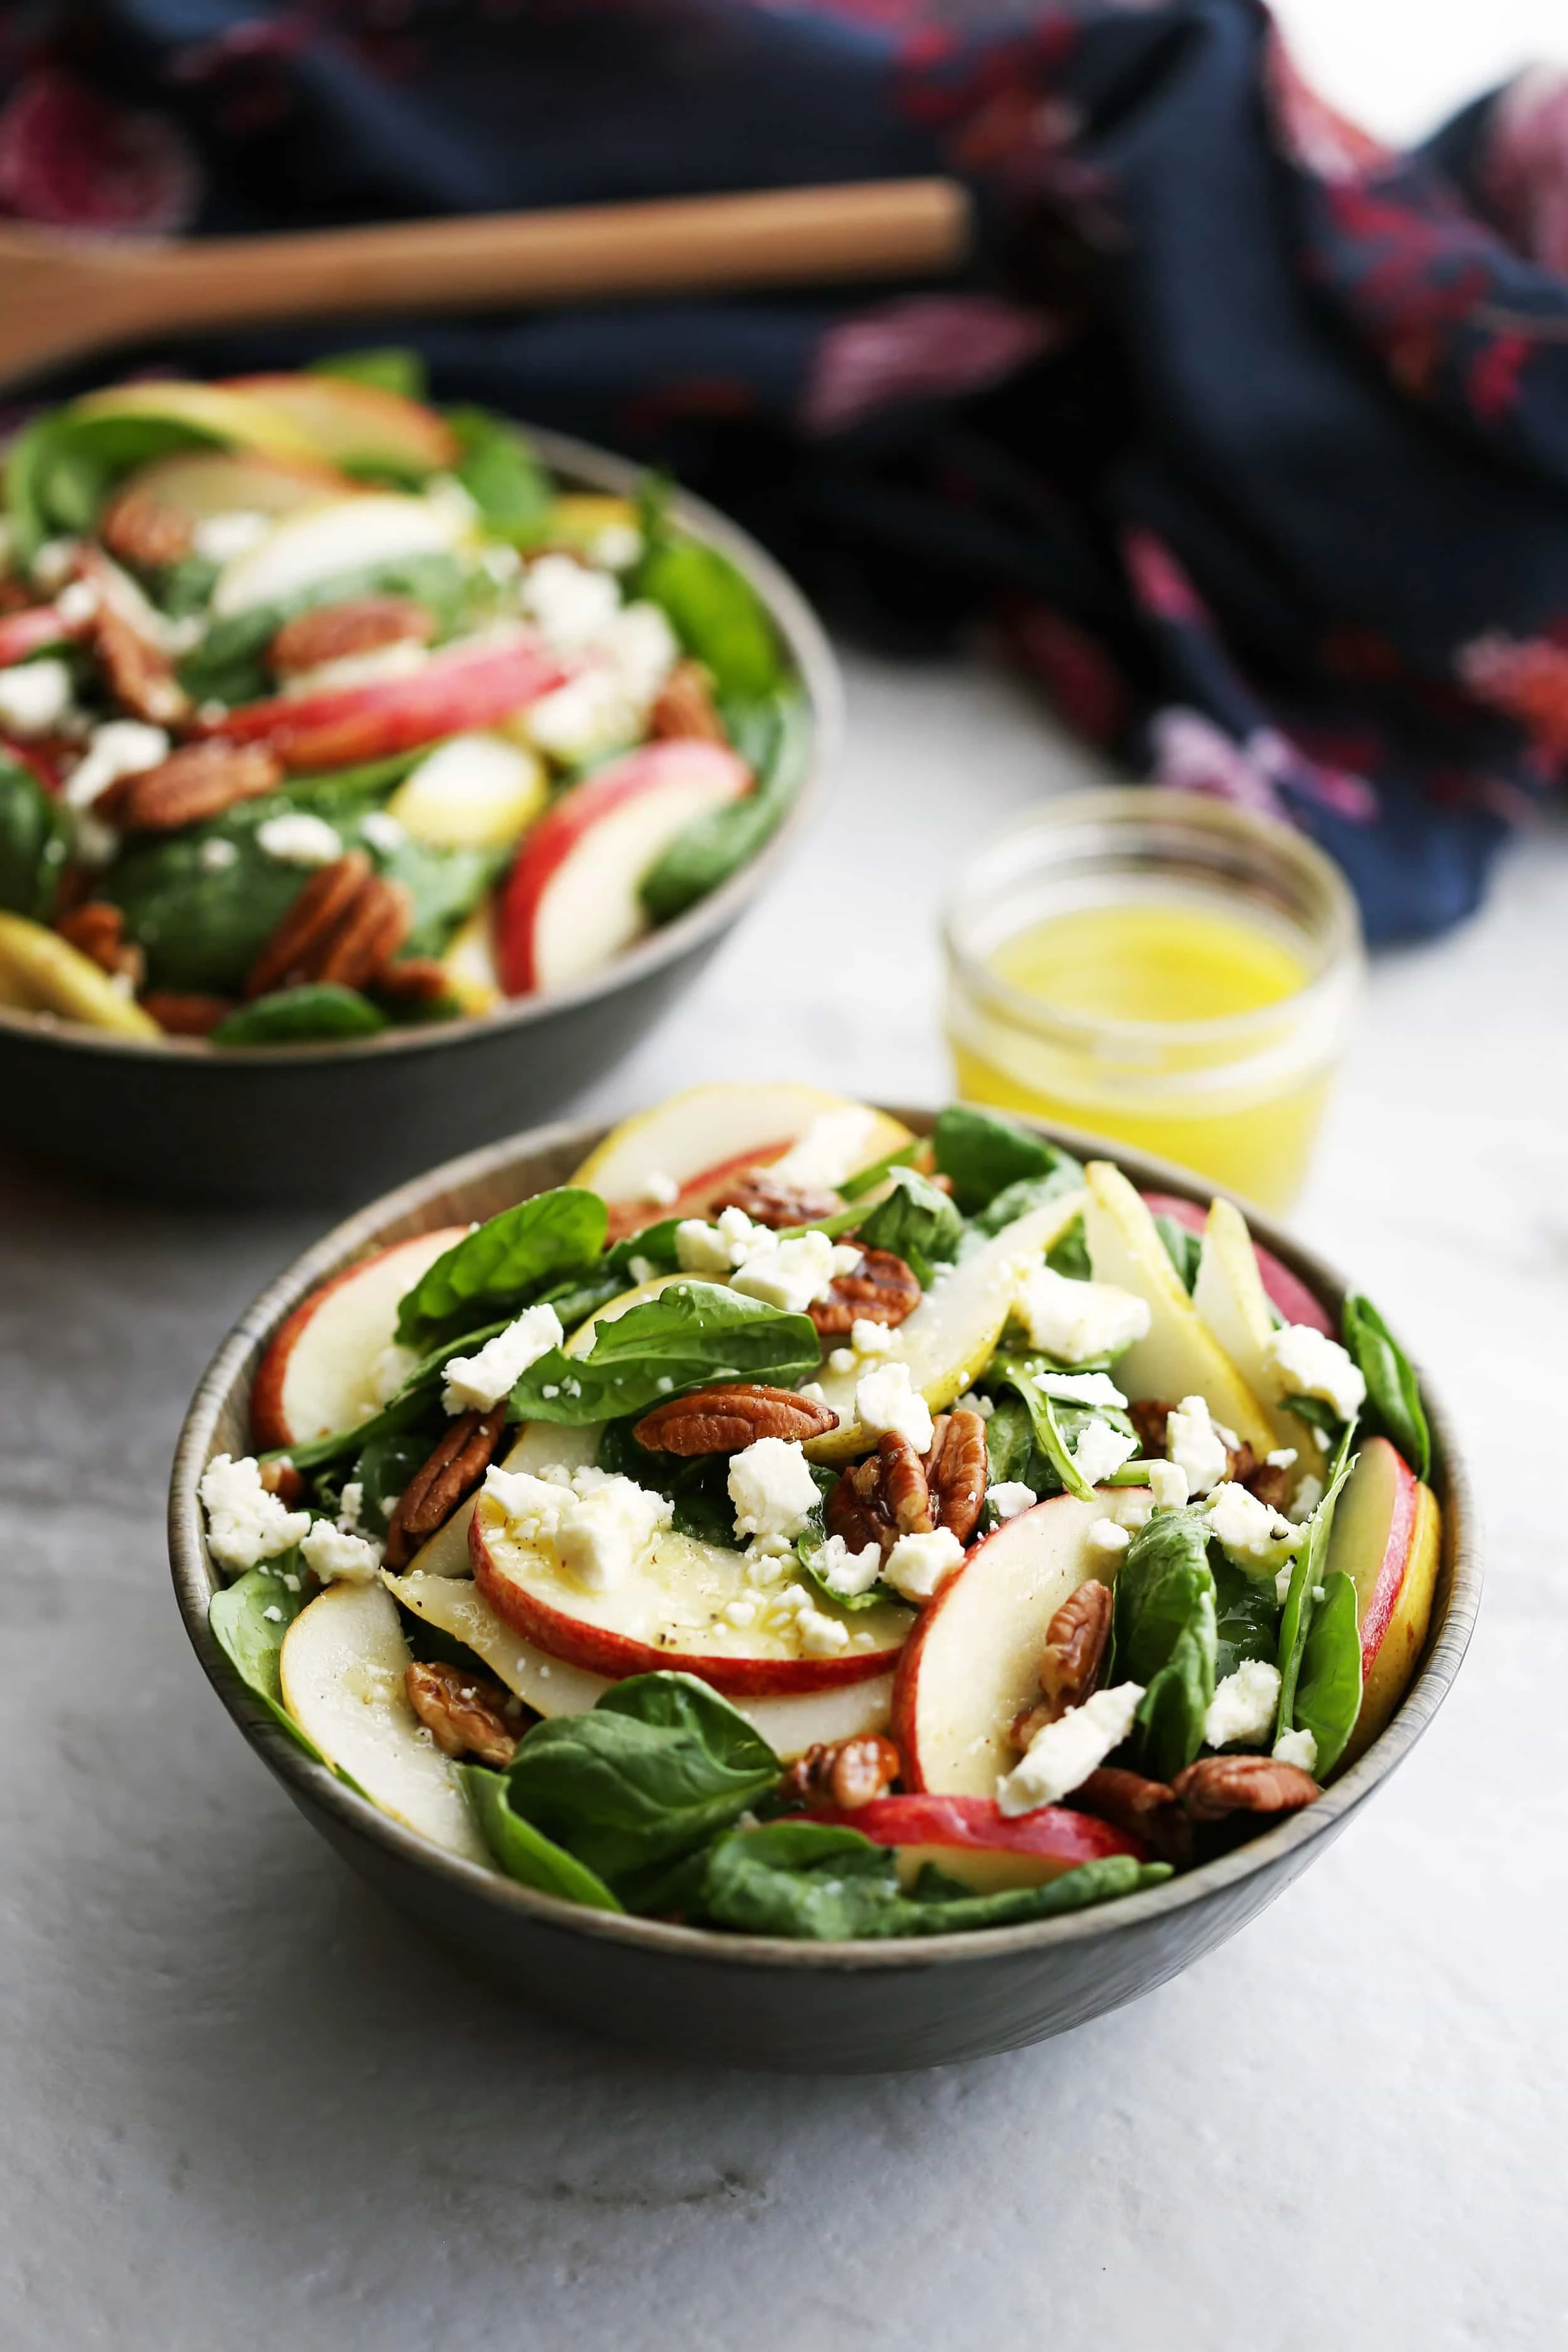 Top angled view of a bowl of apple and pear spinach salad with pecans and feta cheese.